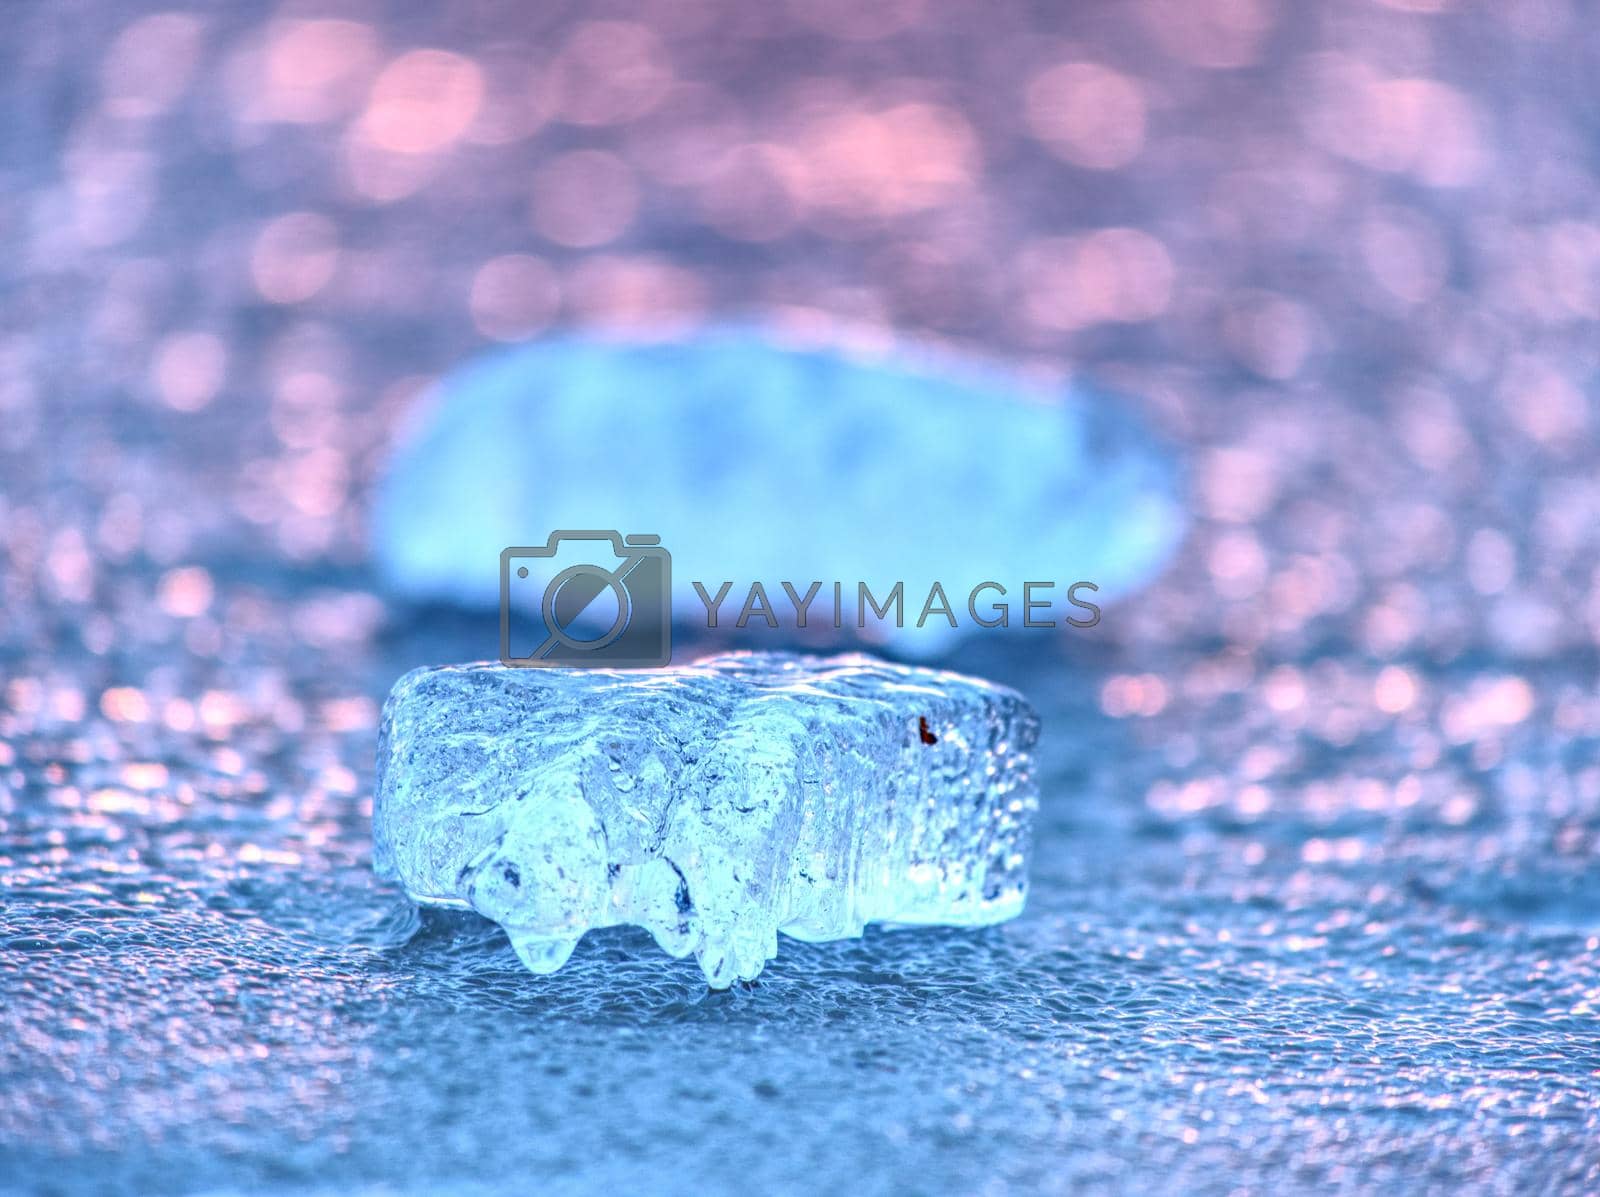 Royalty free image of Ice shard and small cracked ice pieces on melring glacier. Icy fragments are melting  by rdonar2